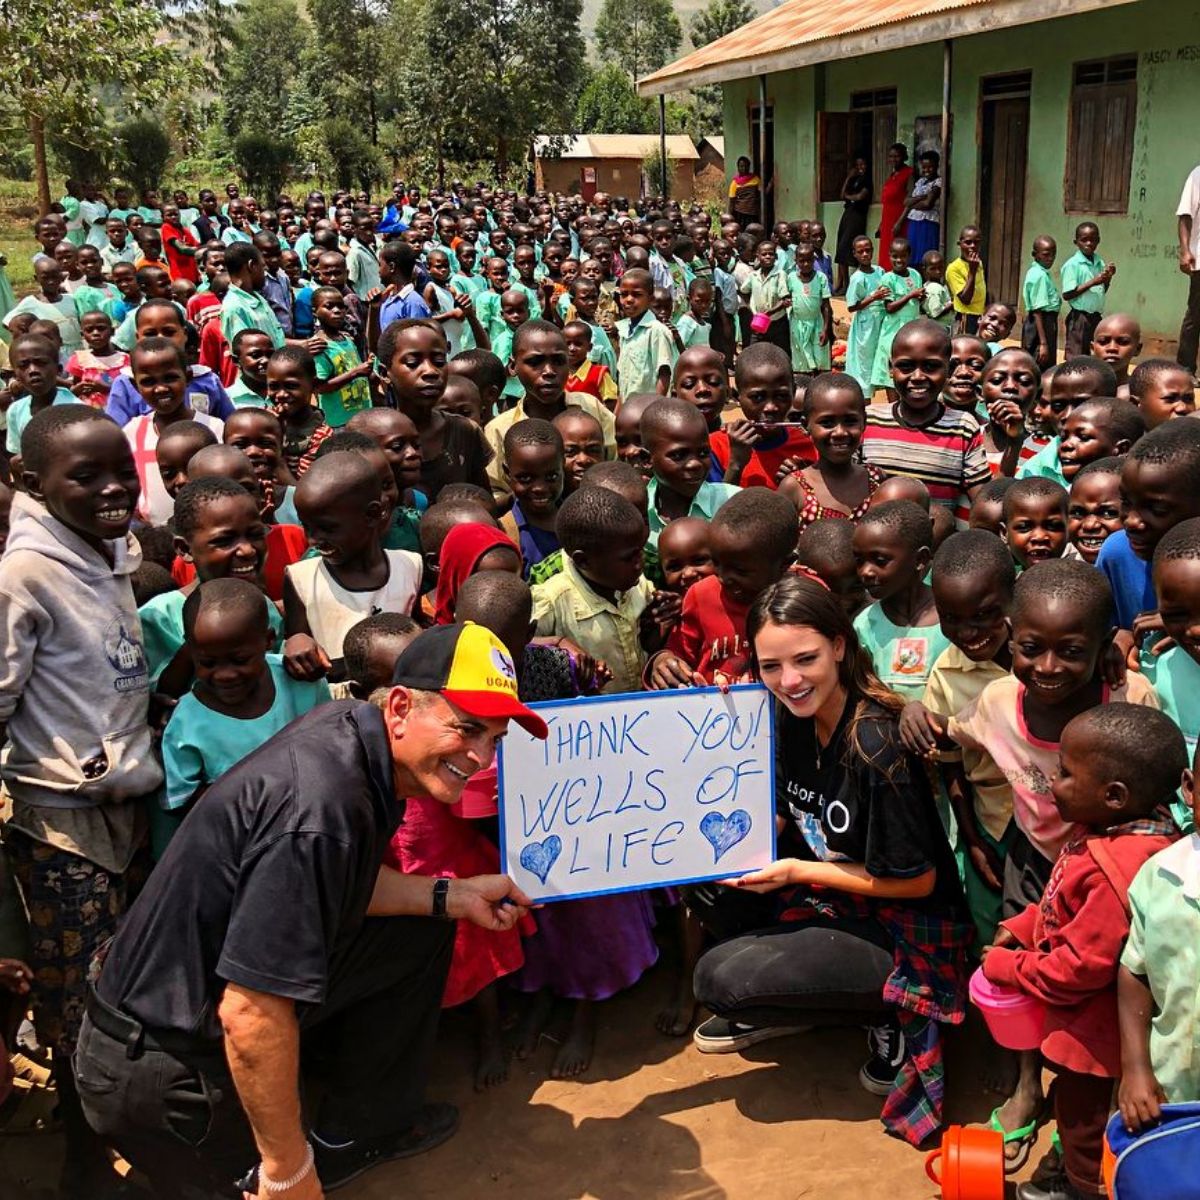 Keleigh Sperry, her dad, and many Ugandan children posing for a photo shoot while holding Thank You Wells of Life banner.